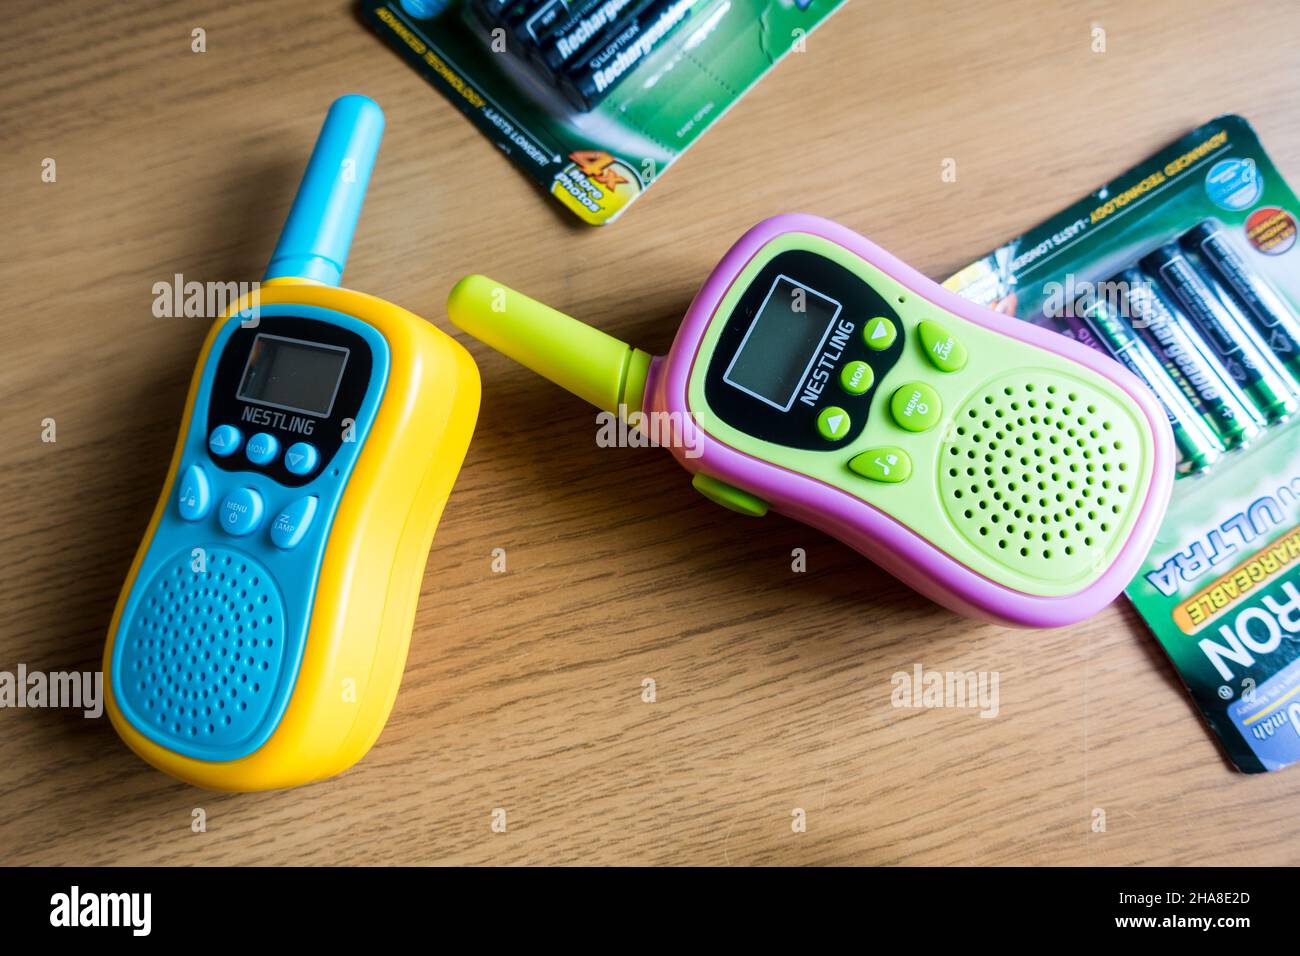 Battery Operated Toys High Resolution Stock Photography and Images - Alamy